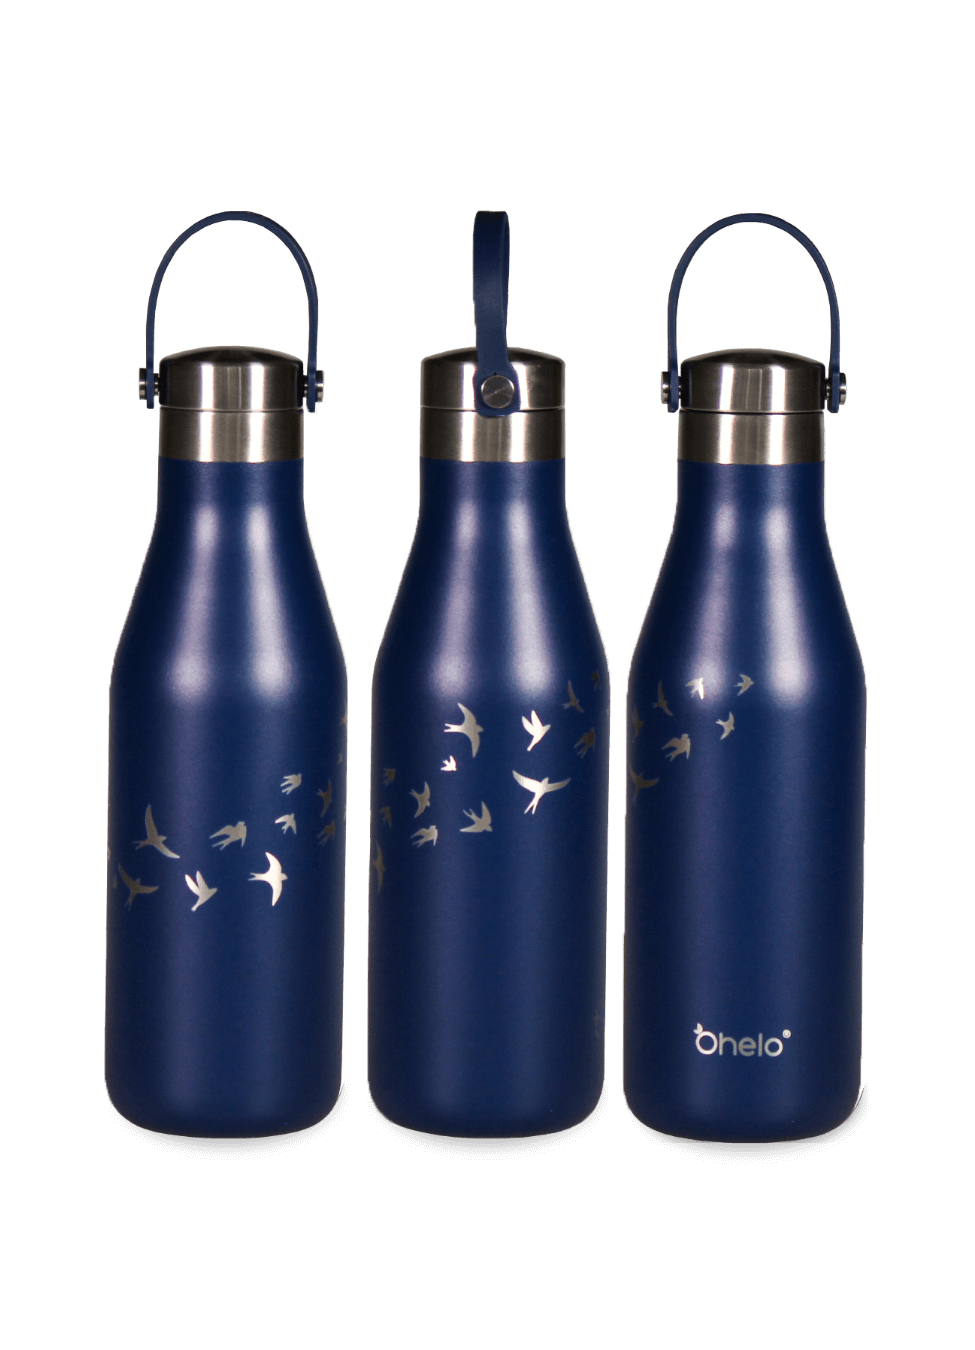 Ohelo Oxford Blue Swallows insulated reusable bottle from 3 sides to show full design